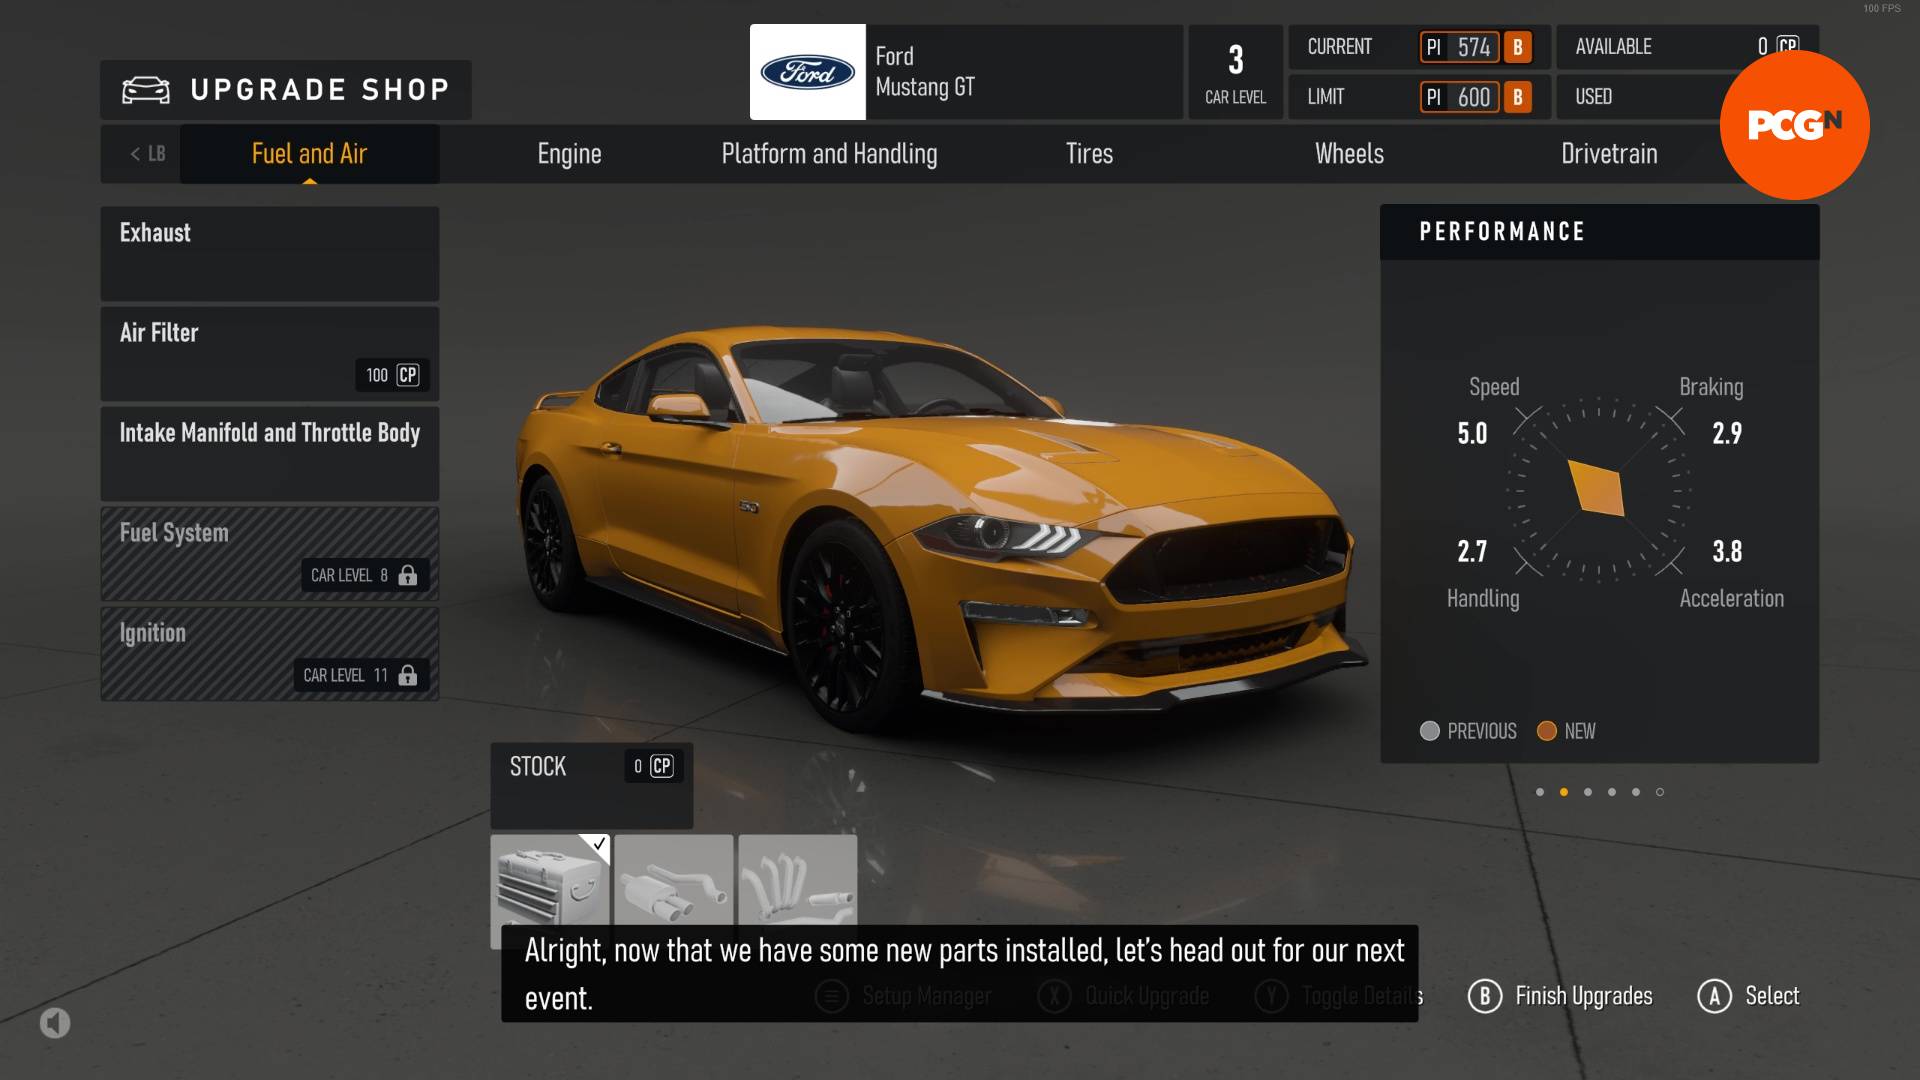 Forza Motorsport review: The upgrade shop showing a yellow Ford Mustang and the available upgrades.